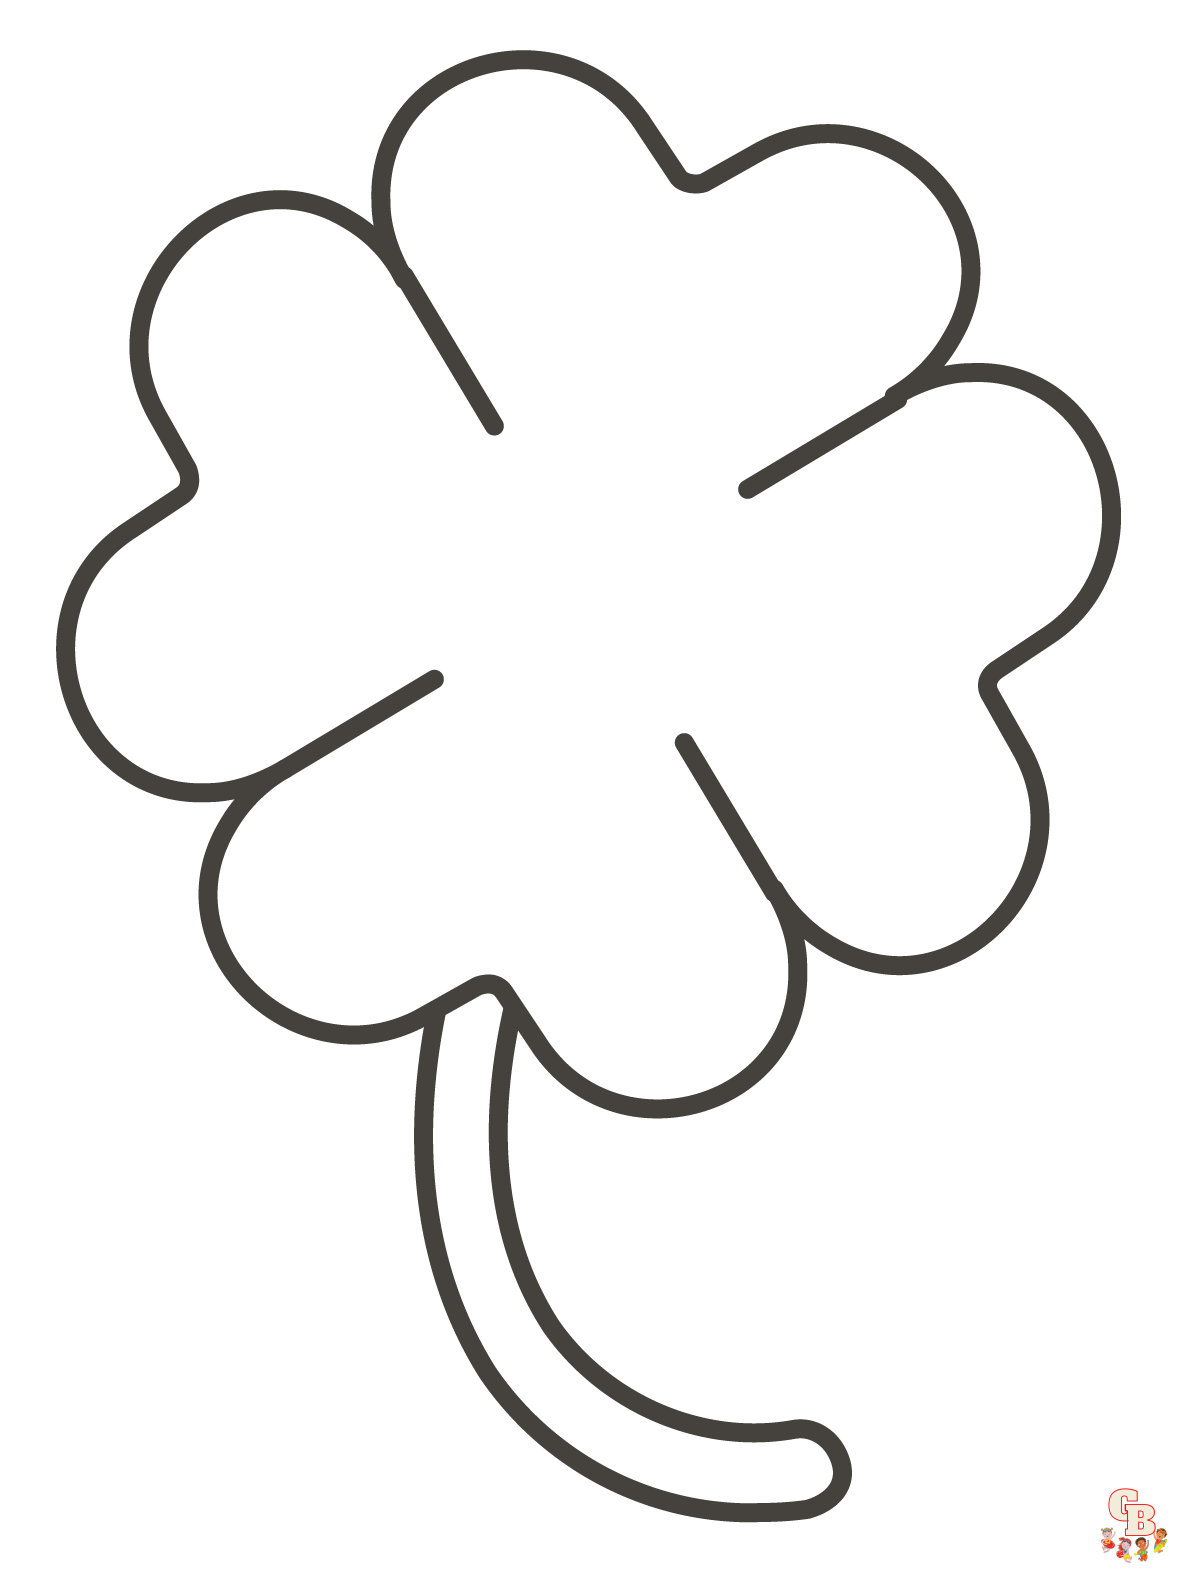 three leaf clover coloring page